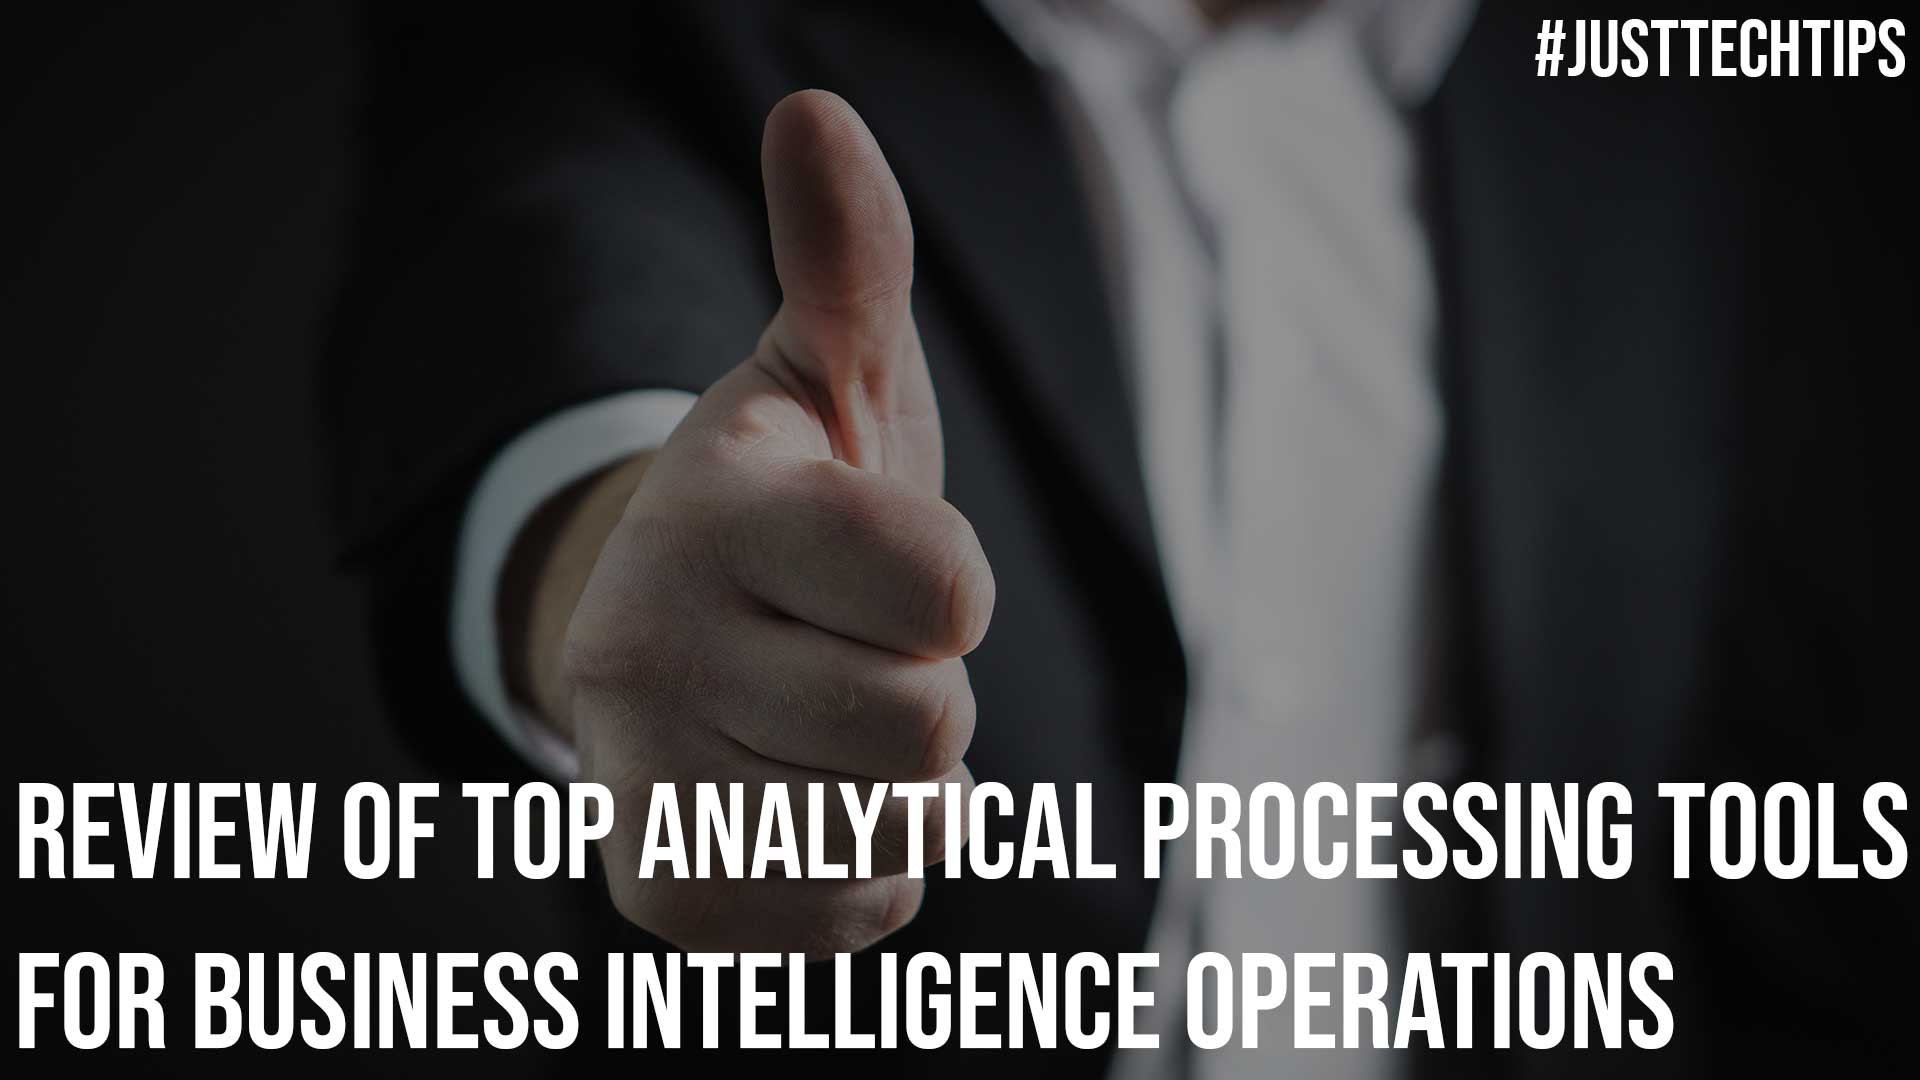 Review of Top Analytical Processing Tools for Business Intelligence Operations